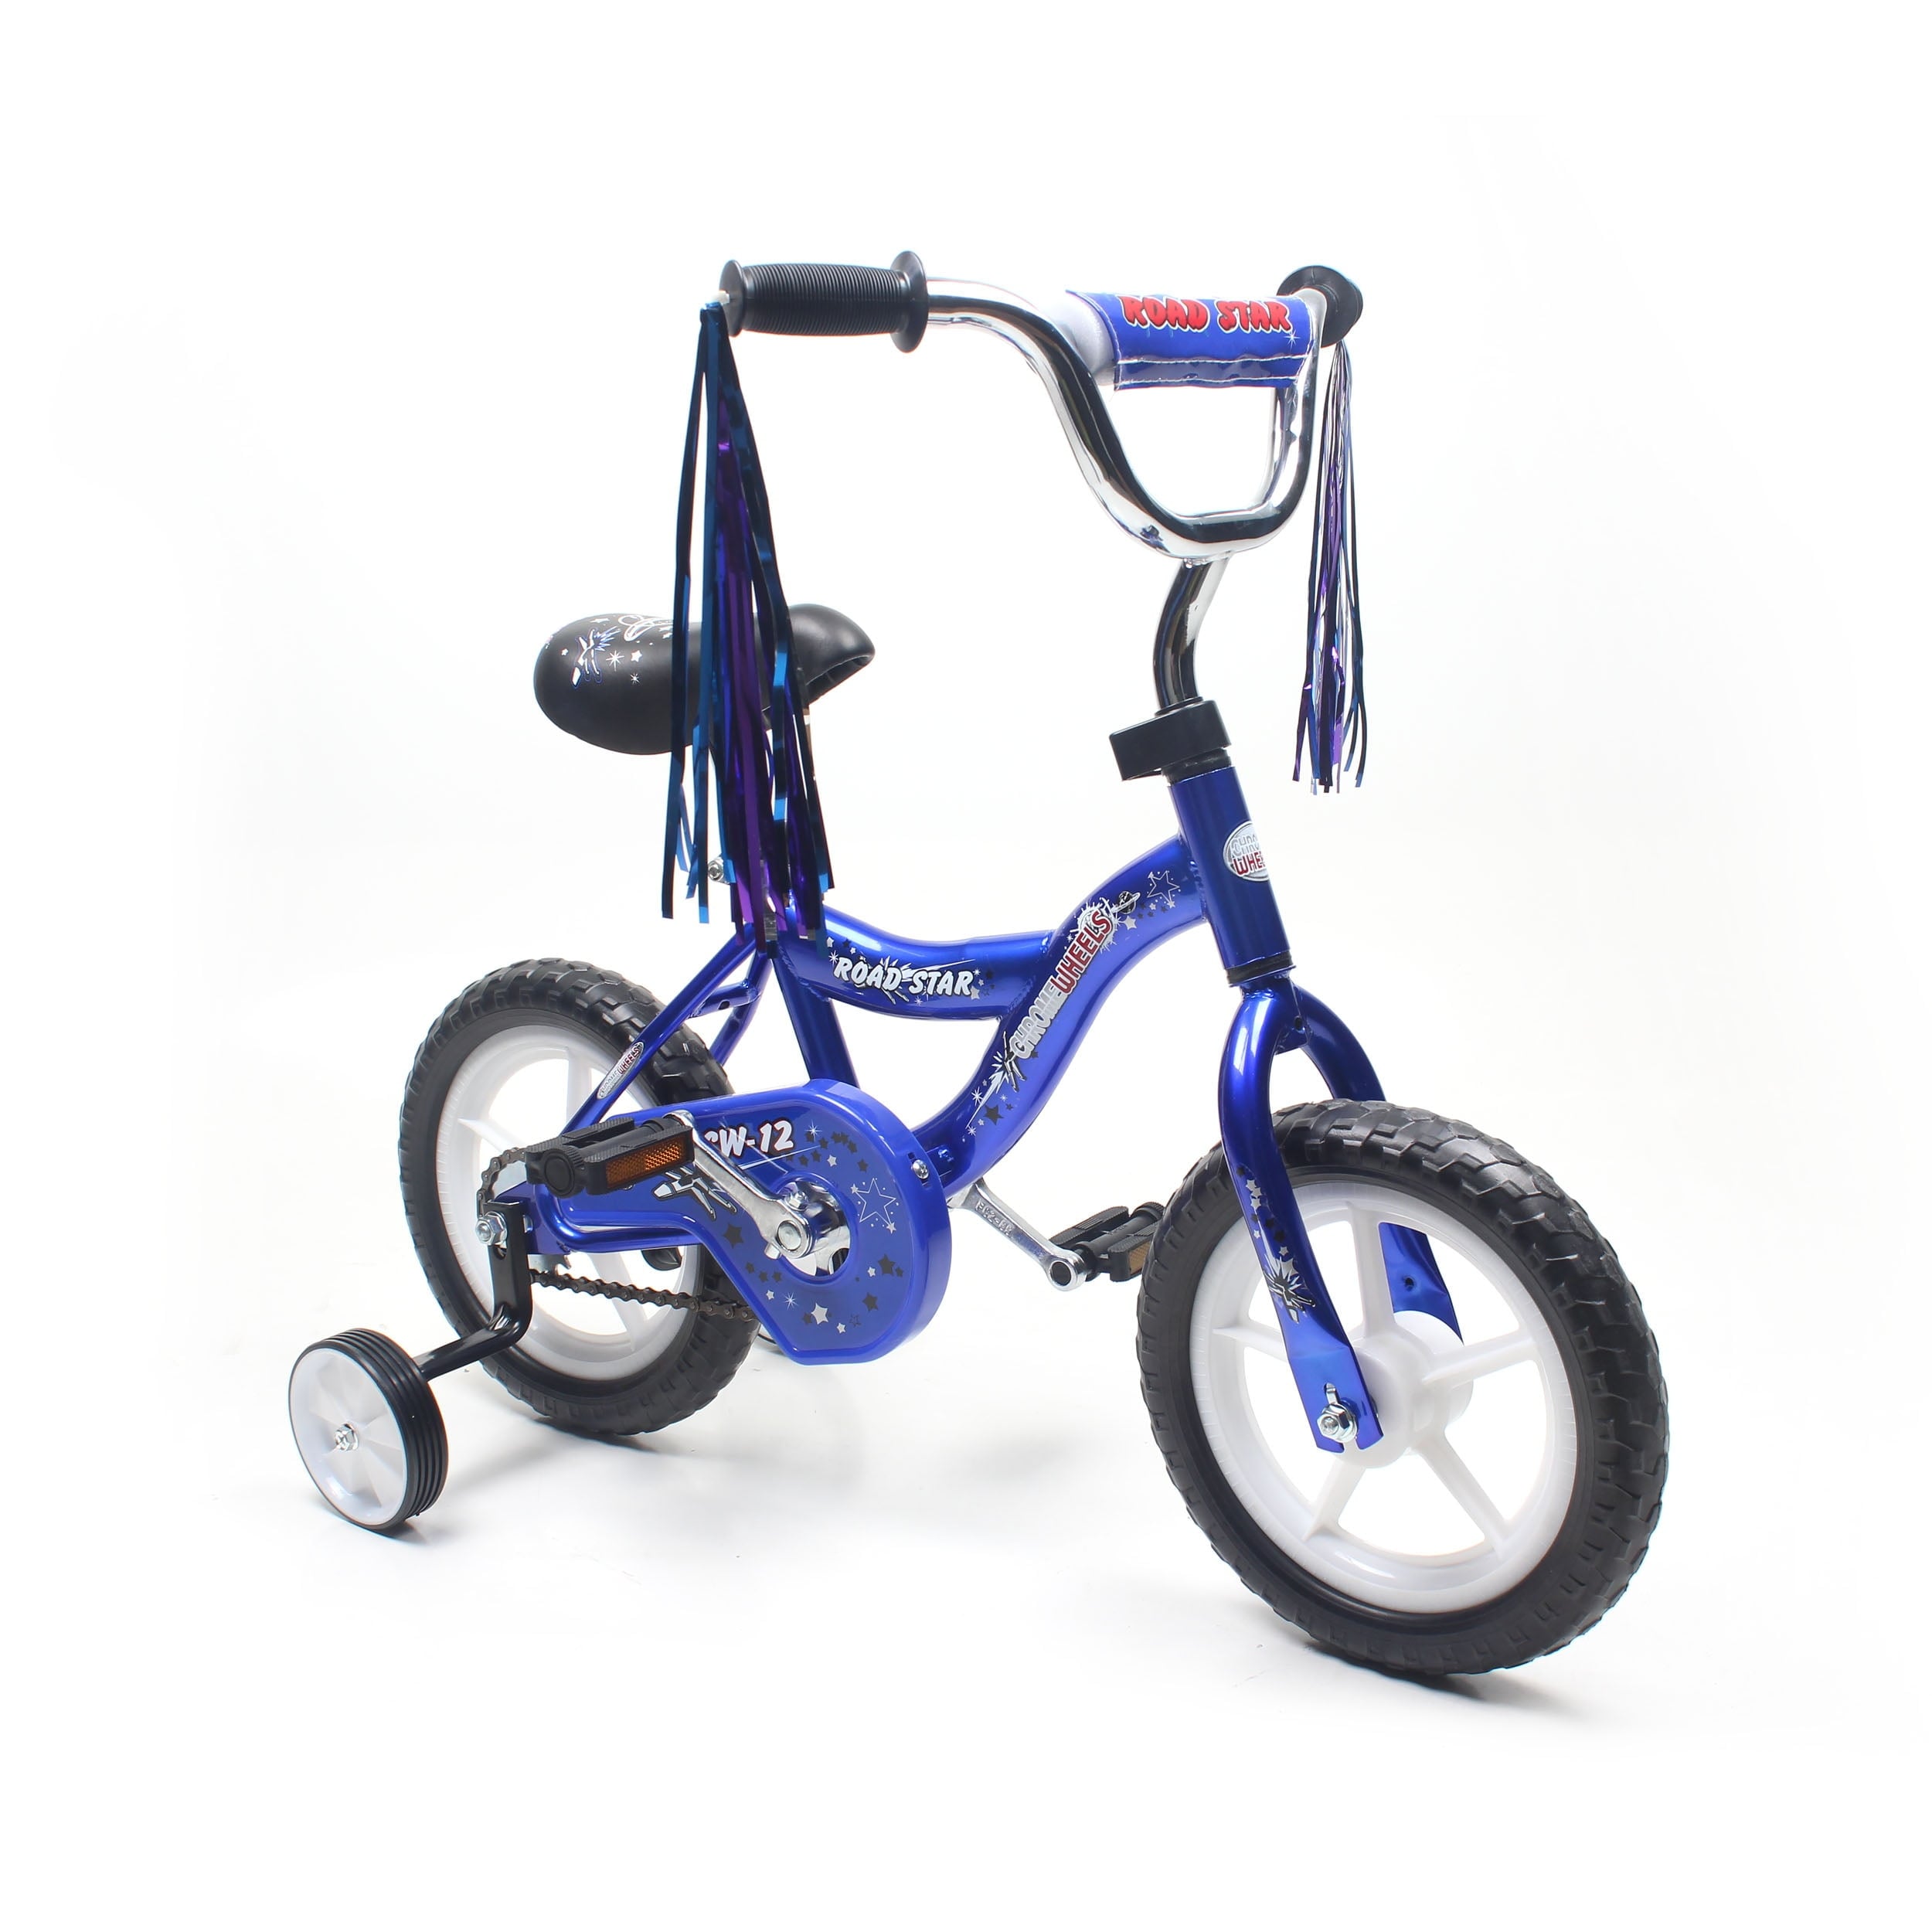 Kid's Bike for 2-4 Years Old, Bicycle for Girls wi...